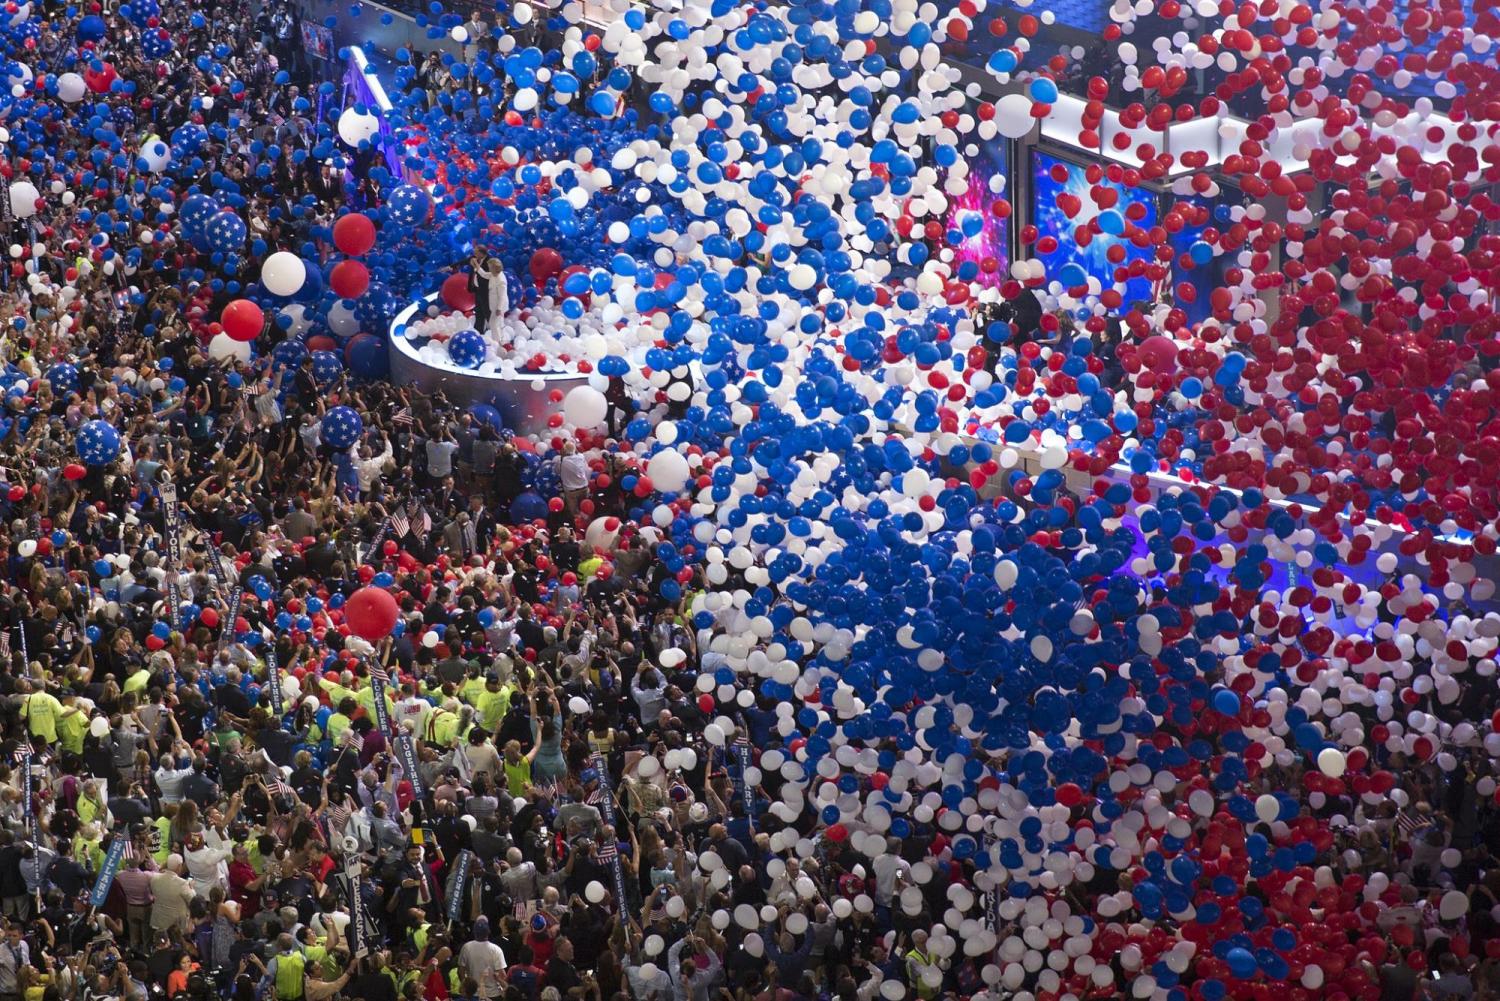 The balloon drop at the DNC Convention in 2016